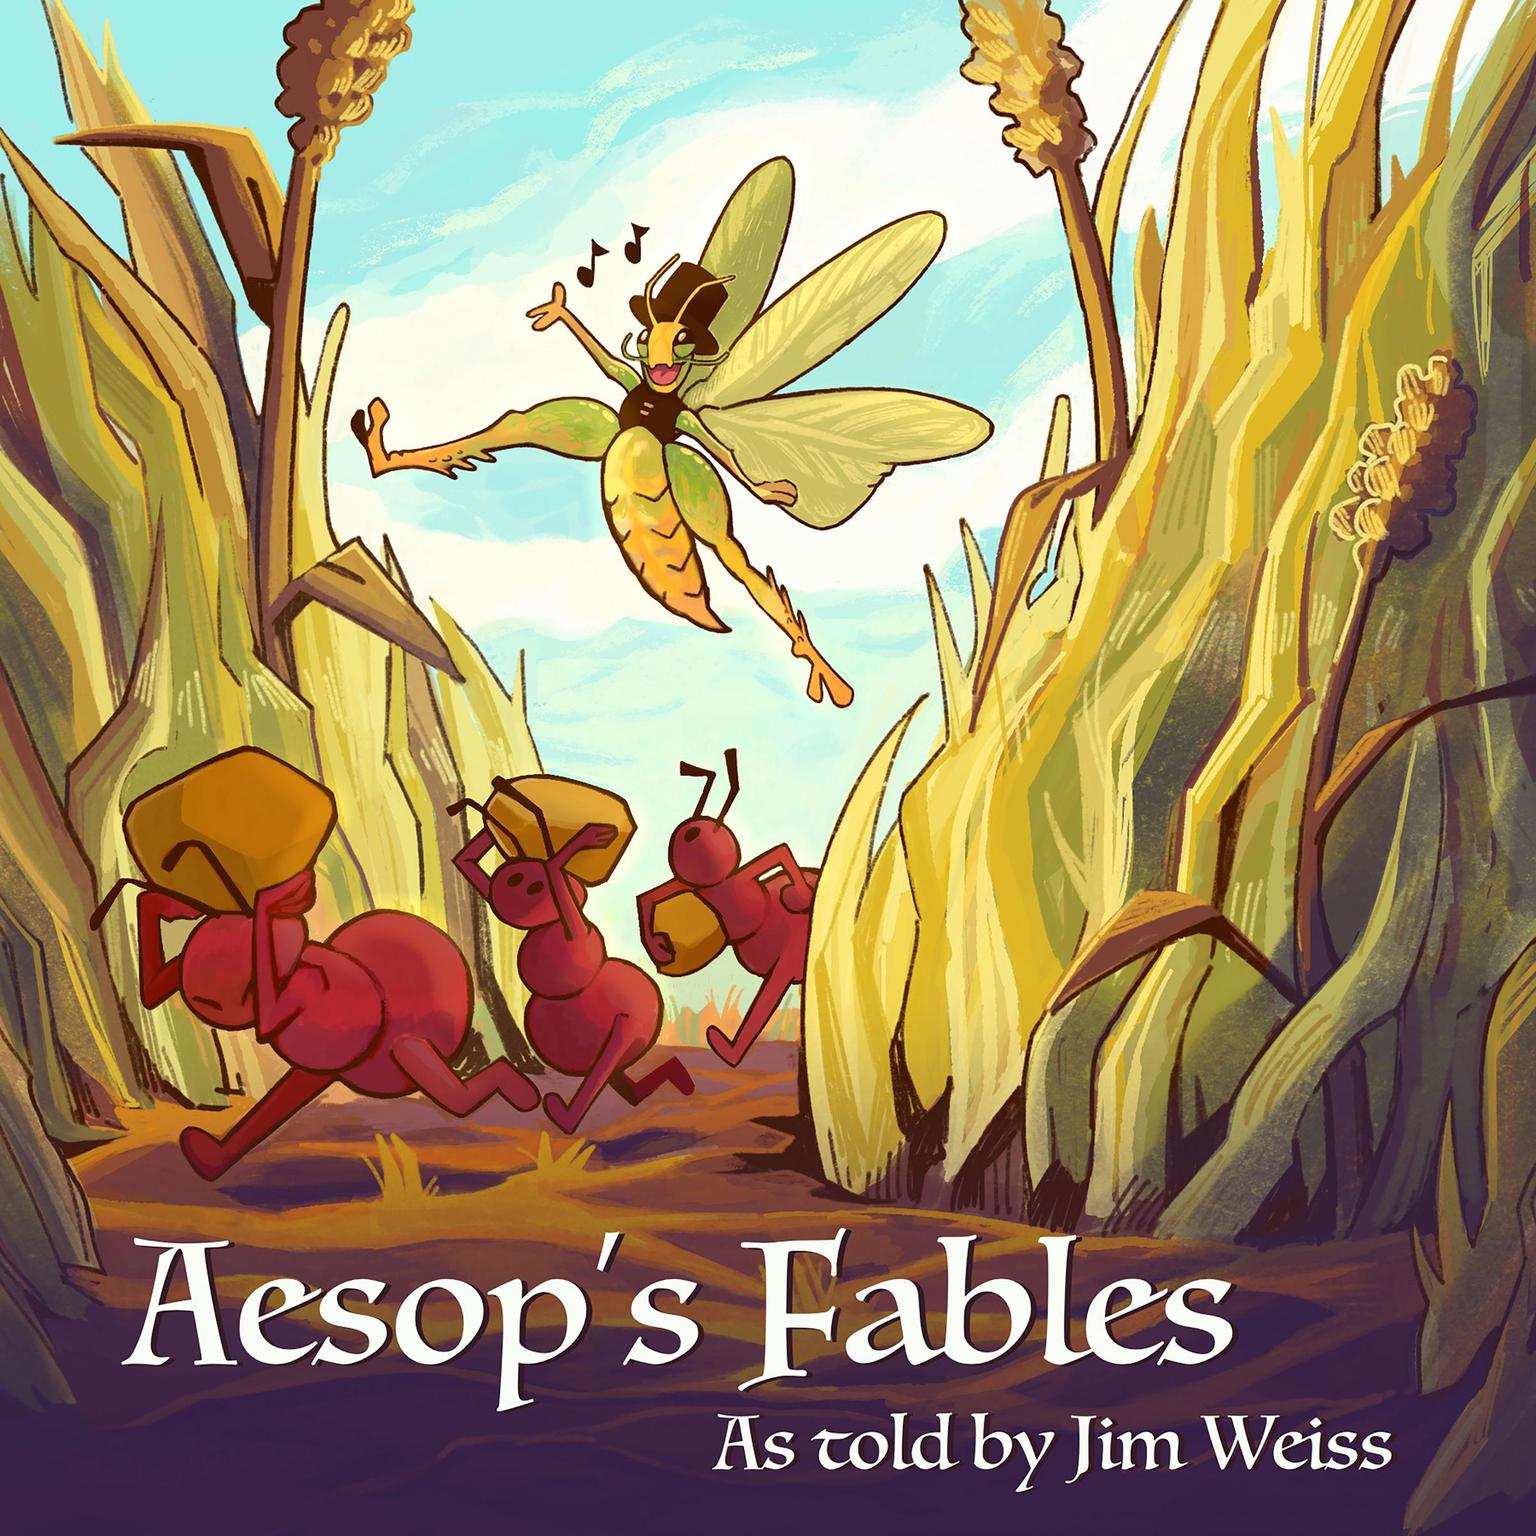 Aesops Fables, as Told by Jim Weiss Audiobook, by Jim Weiss